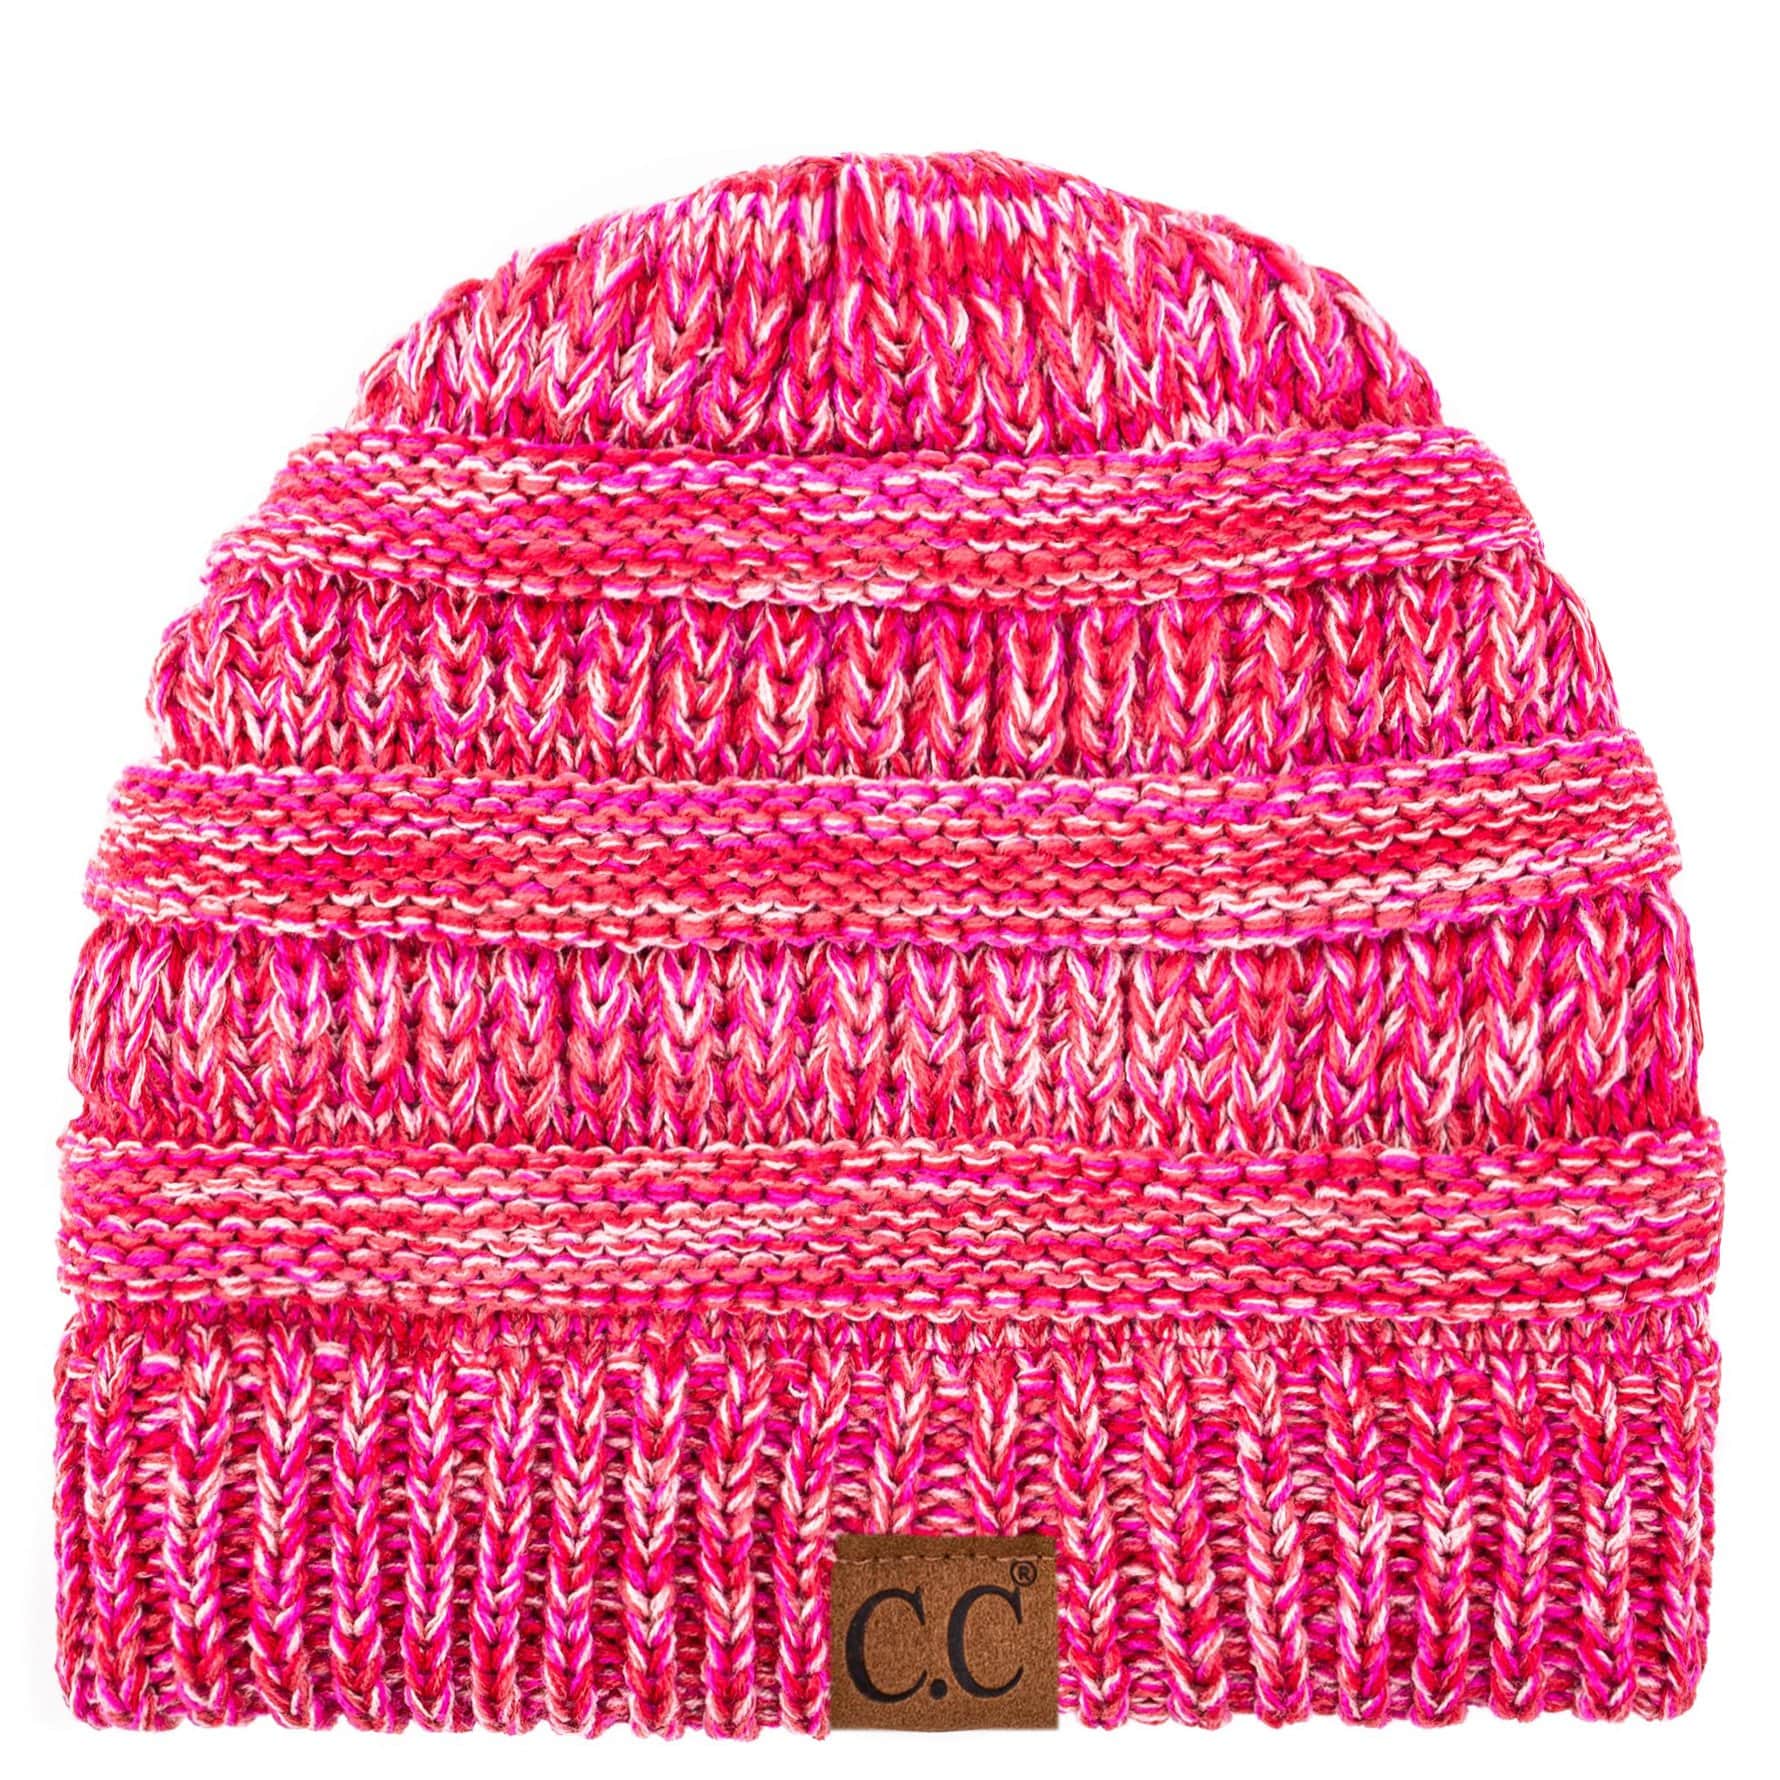 C.C Apparel Three Tone Coral C.C Trendy Warm Chunky Soft Stretch Three-Toned Cable Knit Beanie Skully